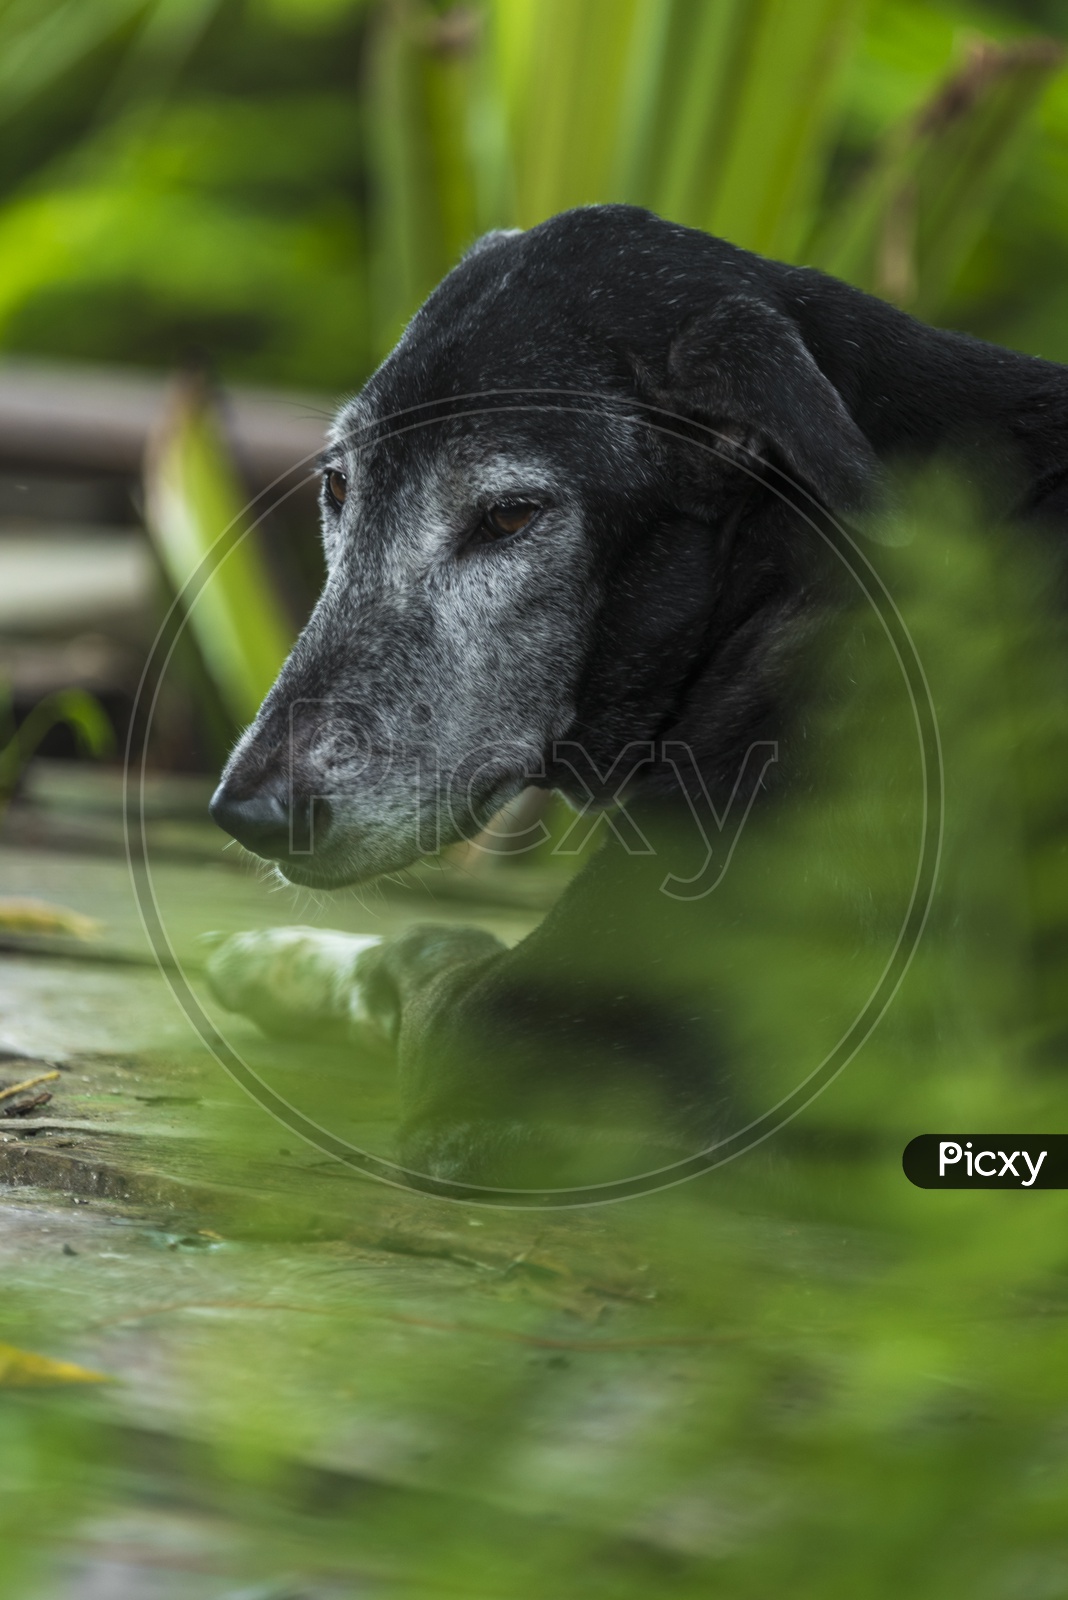 Black Dog In Outdoor Nature Backdrop